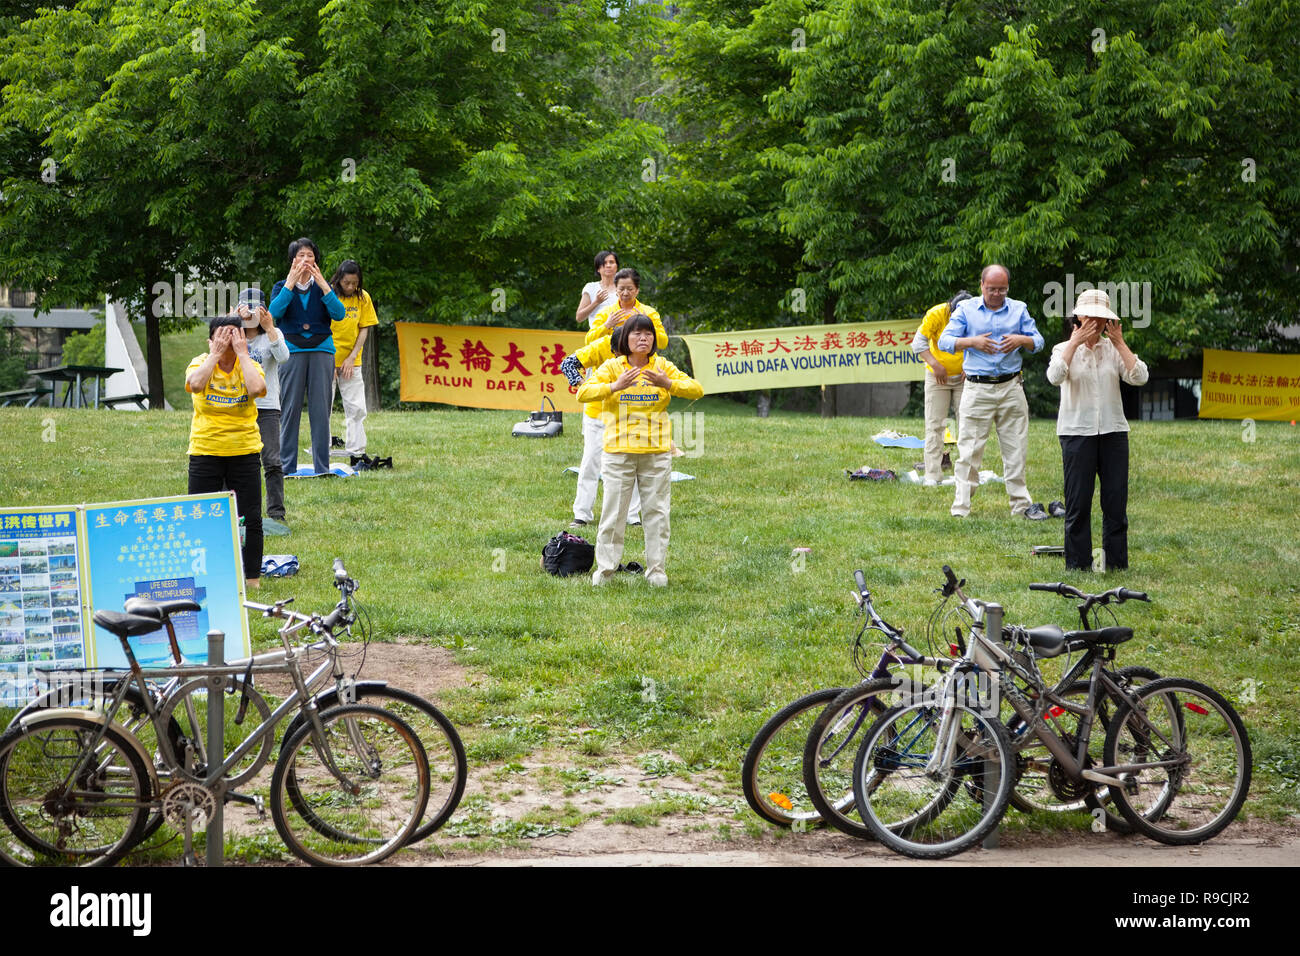 People practicing Falun Dafa or Falun Gong which is a Chinese spiritual practice. City of Toronto, Ontario, Canada. Stock Photo